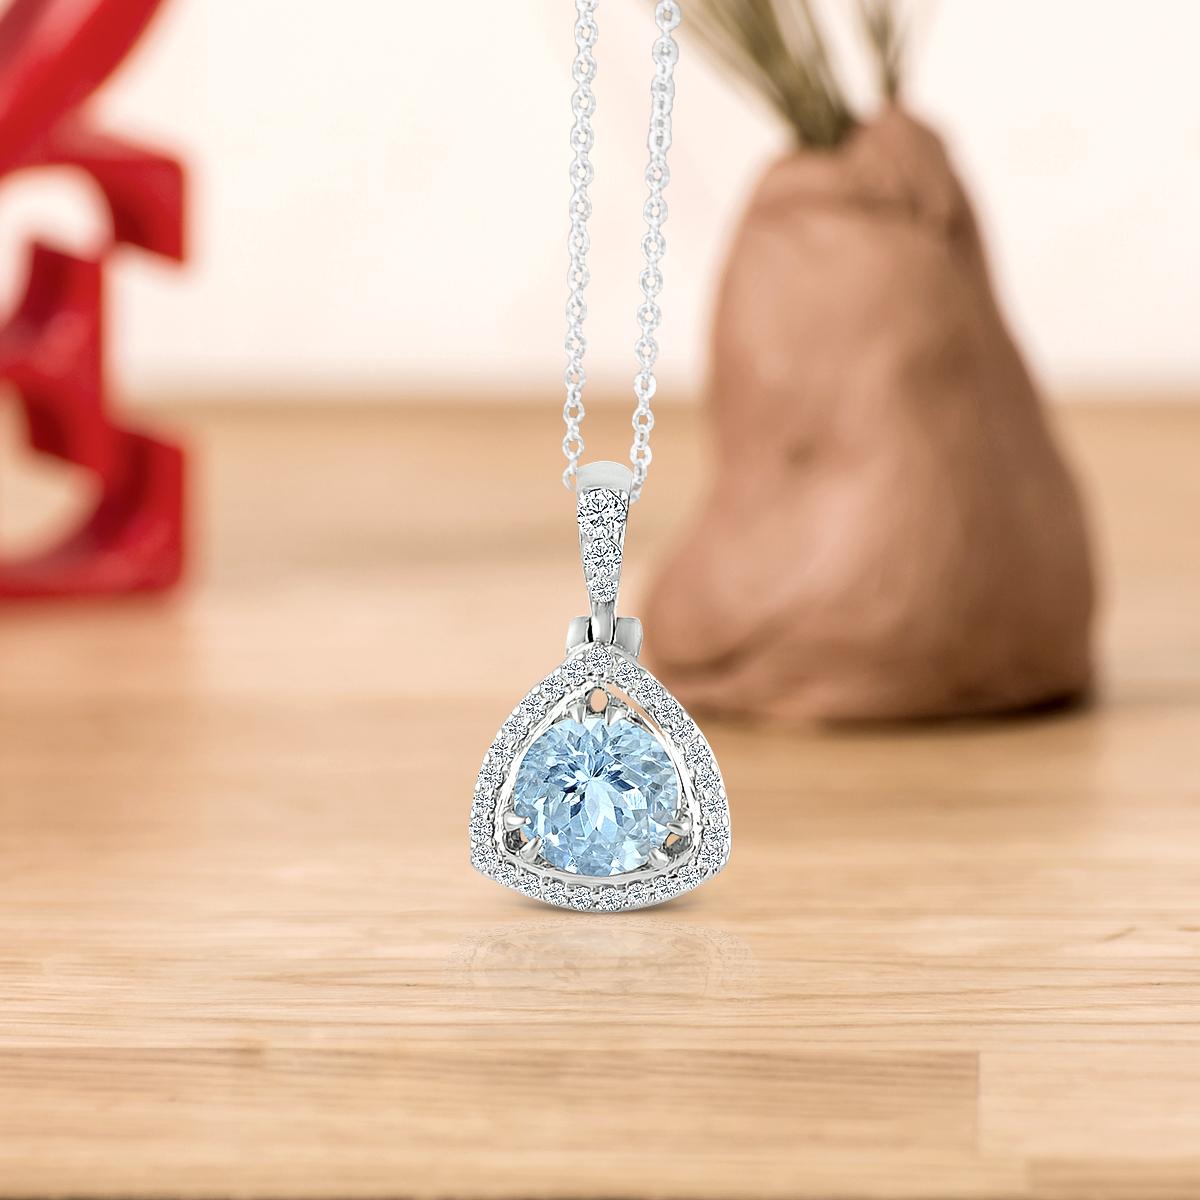 Round Cut 14k White Gold 0.81cts Aquamarine and Diamond Pendant, Style#TS1279AQP 22053/13 For Sale